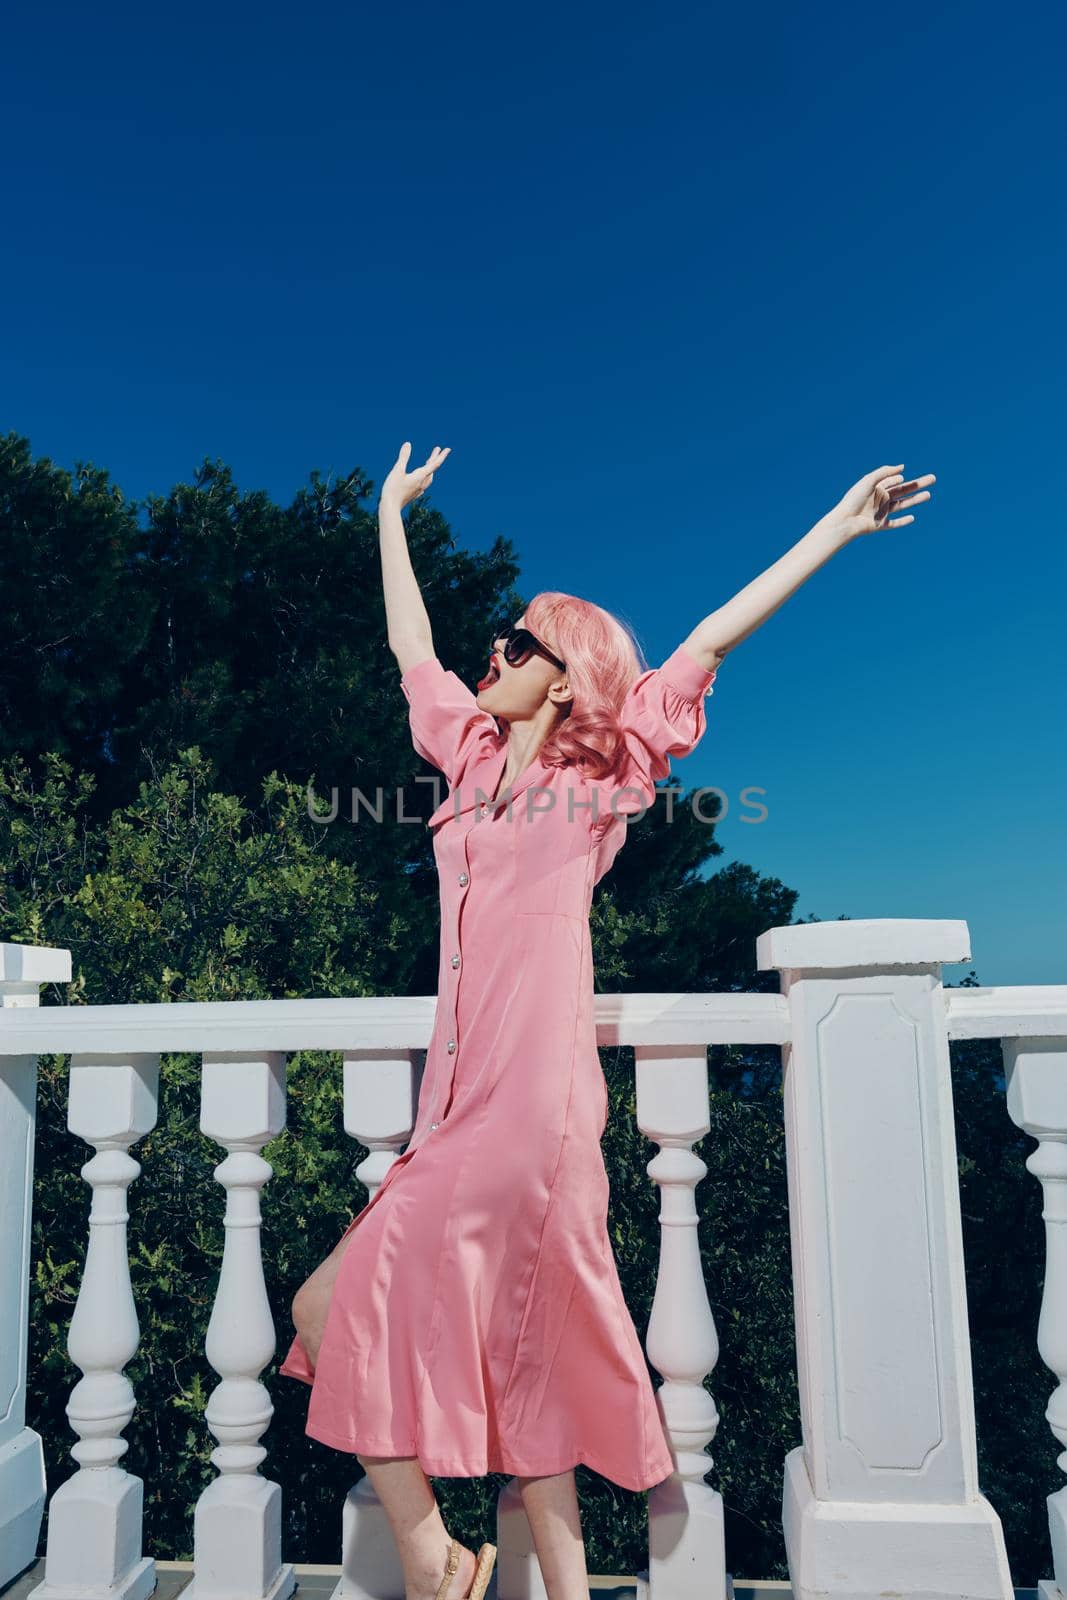 glamorous woman outdoors fashion luxury posing Relaxation concept. High quality photo